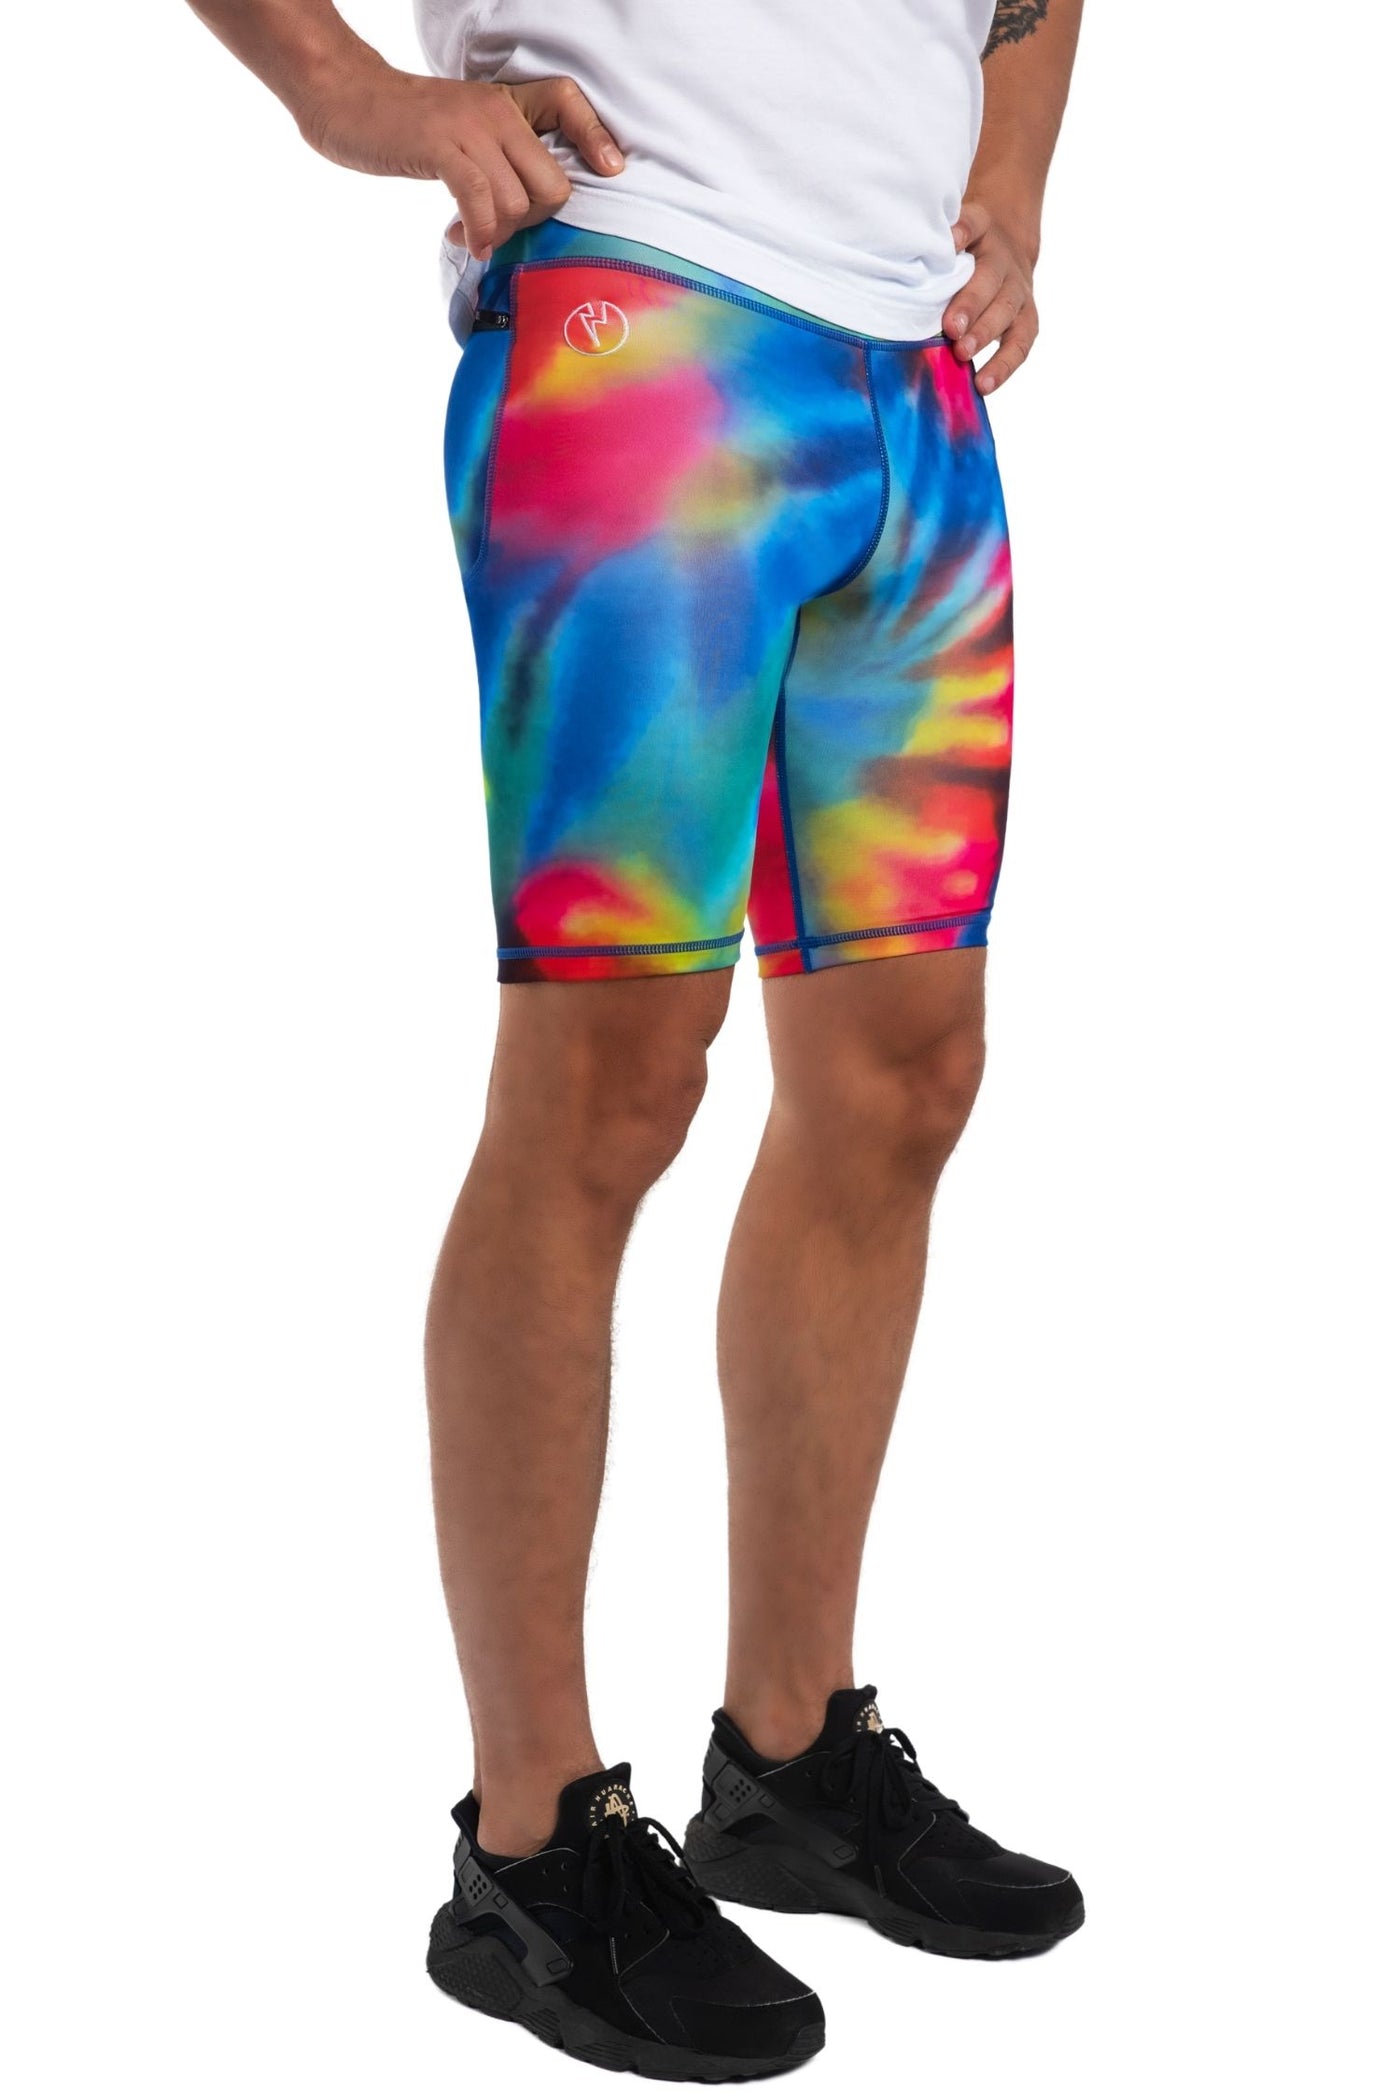 Atomic Recycled Compression Shorts - Kapow Meggings